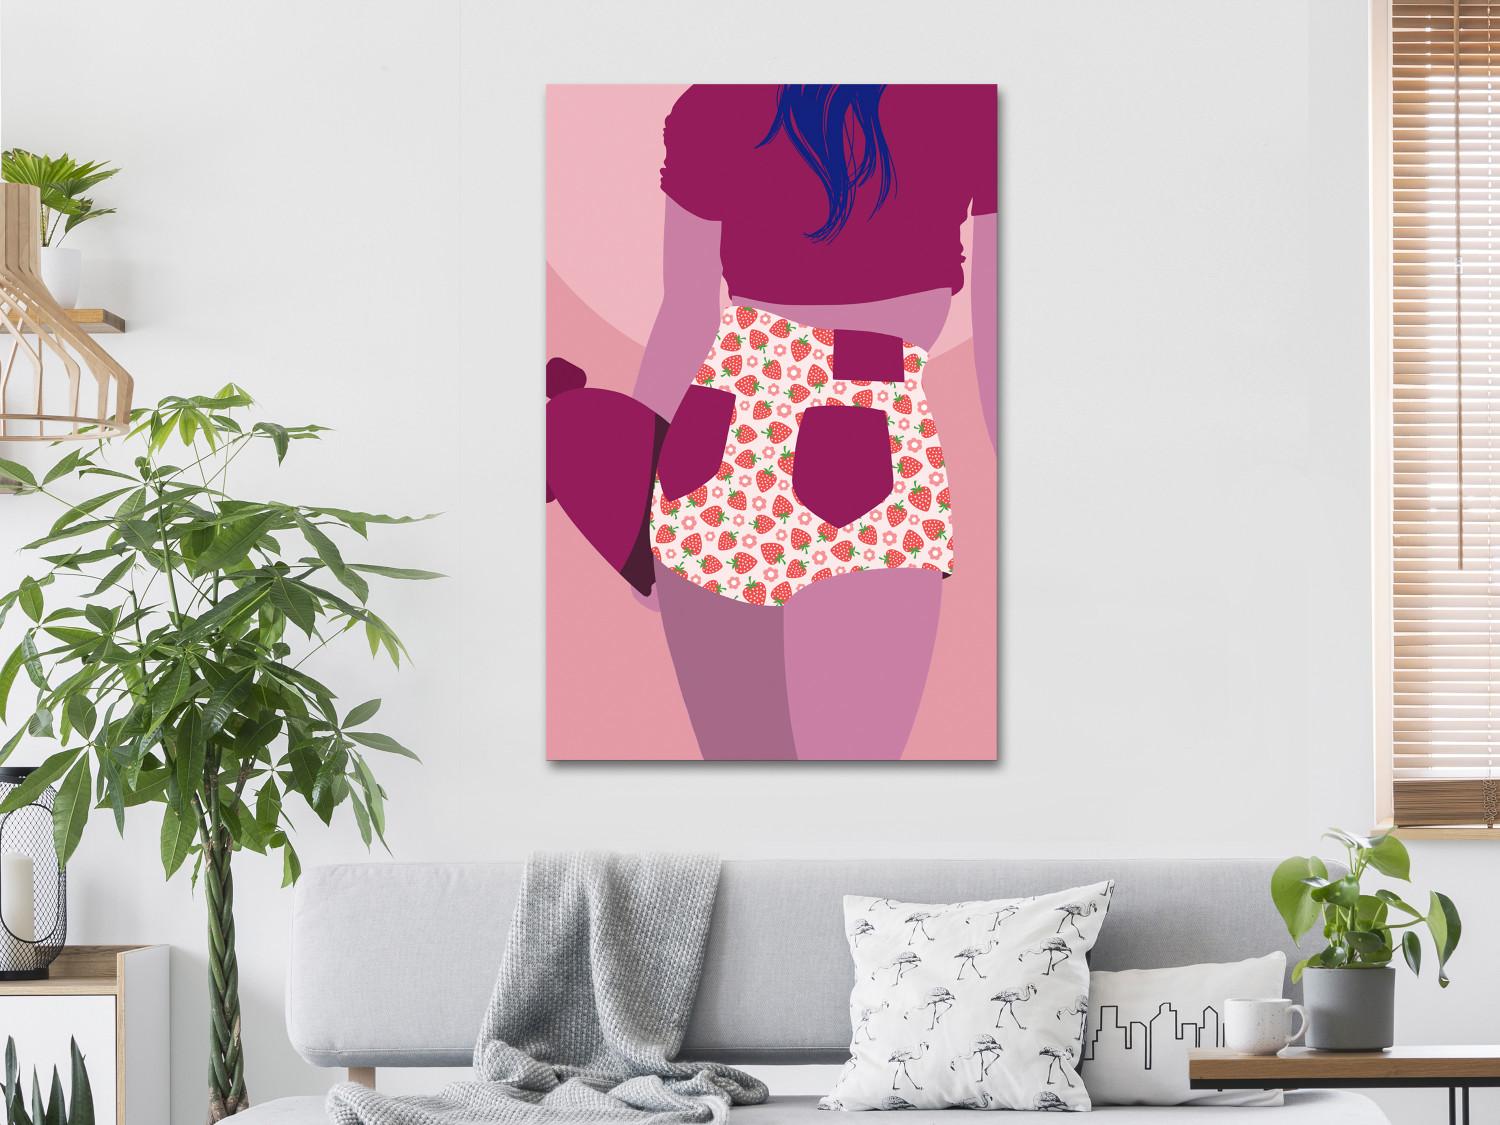 Canvas Woman in shorts - pink and purple graphic with a woman silhouette